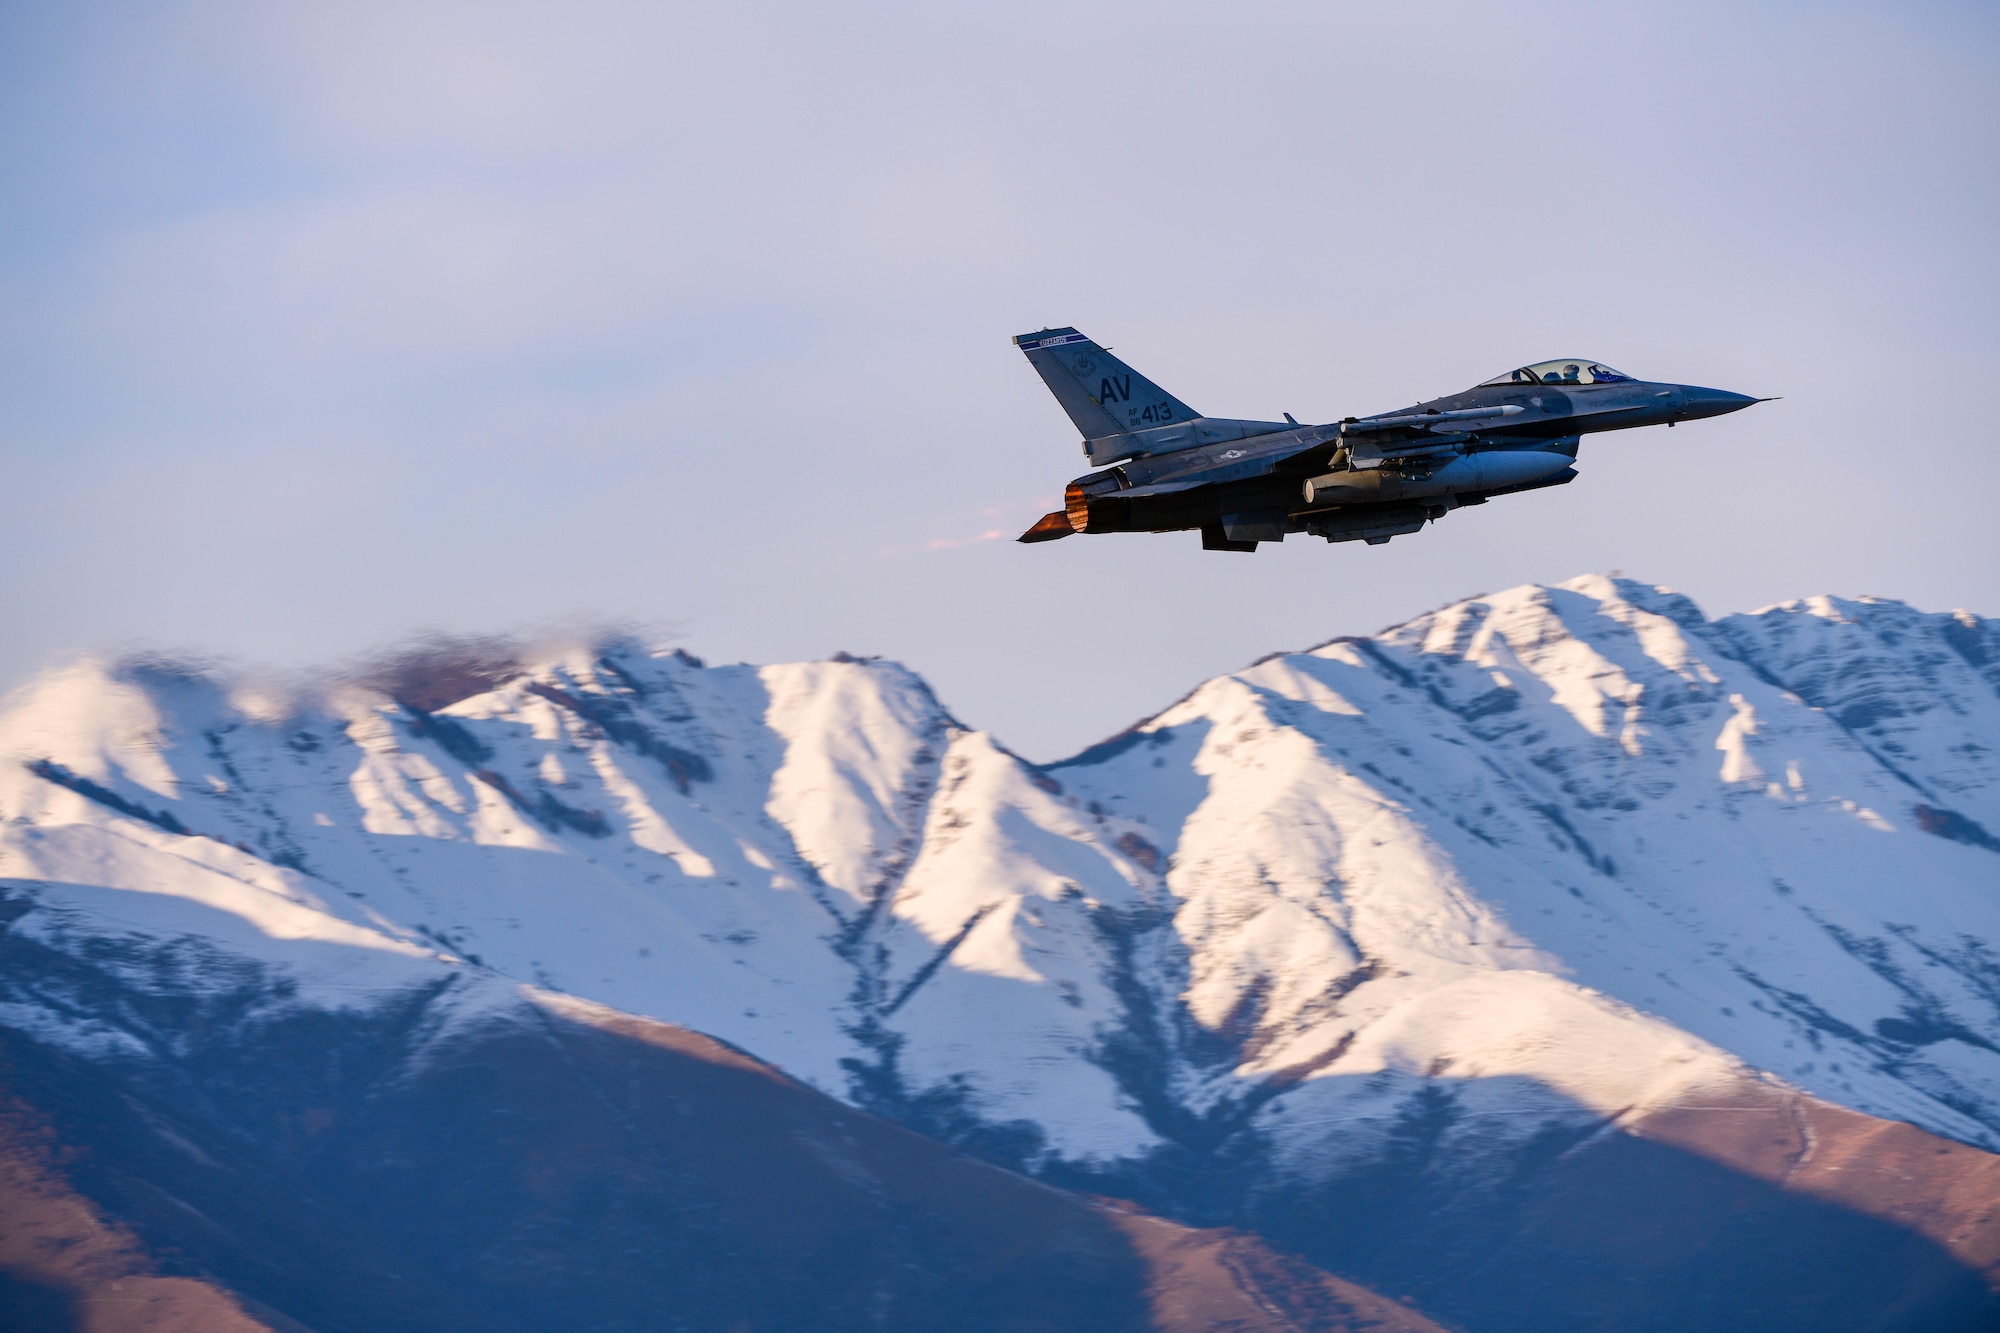 A U.S. Air Force F-16 Fighting Falcon assigned to the 510th Fighter Squadron, takes off at Aviano Air Base, Italy, Nov. 30, 2021. U.S. Air Force F-16 multirole fighters were deployed to the Persian Gulf in 1991 in support of Operation Desert Storm, where more sorties were flown than with any other aircraft, during that time. These fighters were used to attack adversary airfields, military production facilities, missile sites and a variety of other targets. (U.S. Air Force photo by Senior Airman Brooke Moeder)